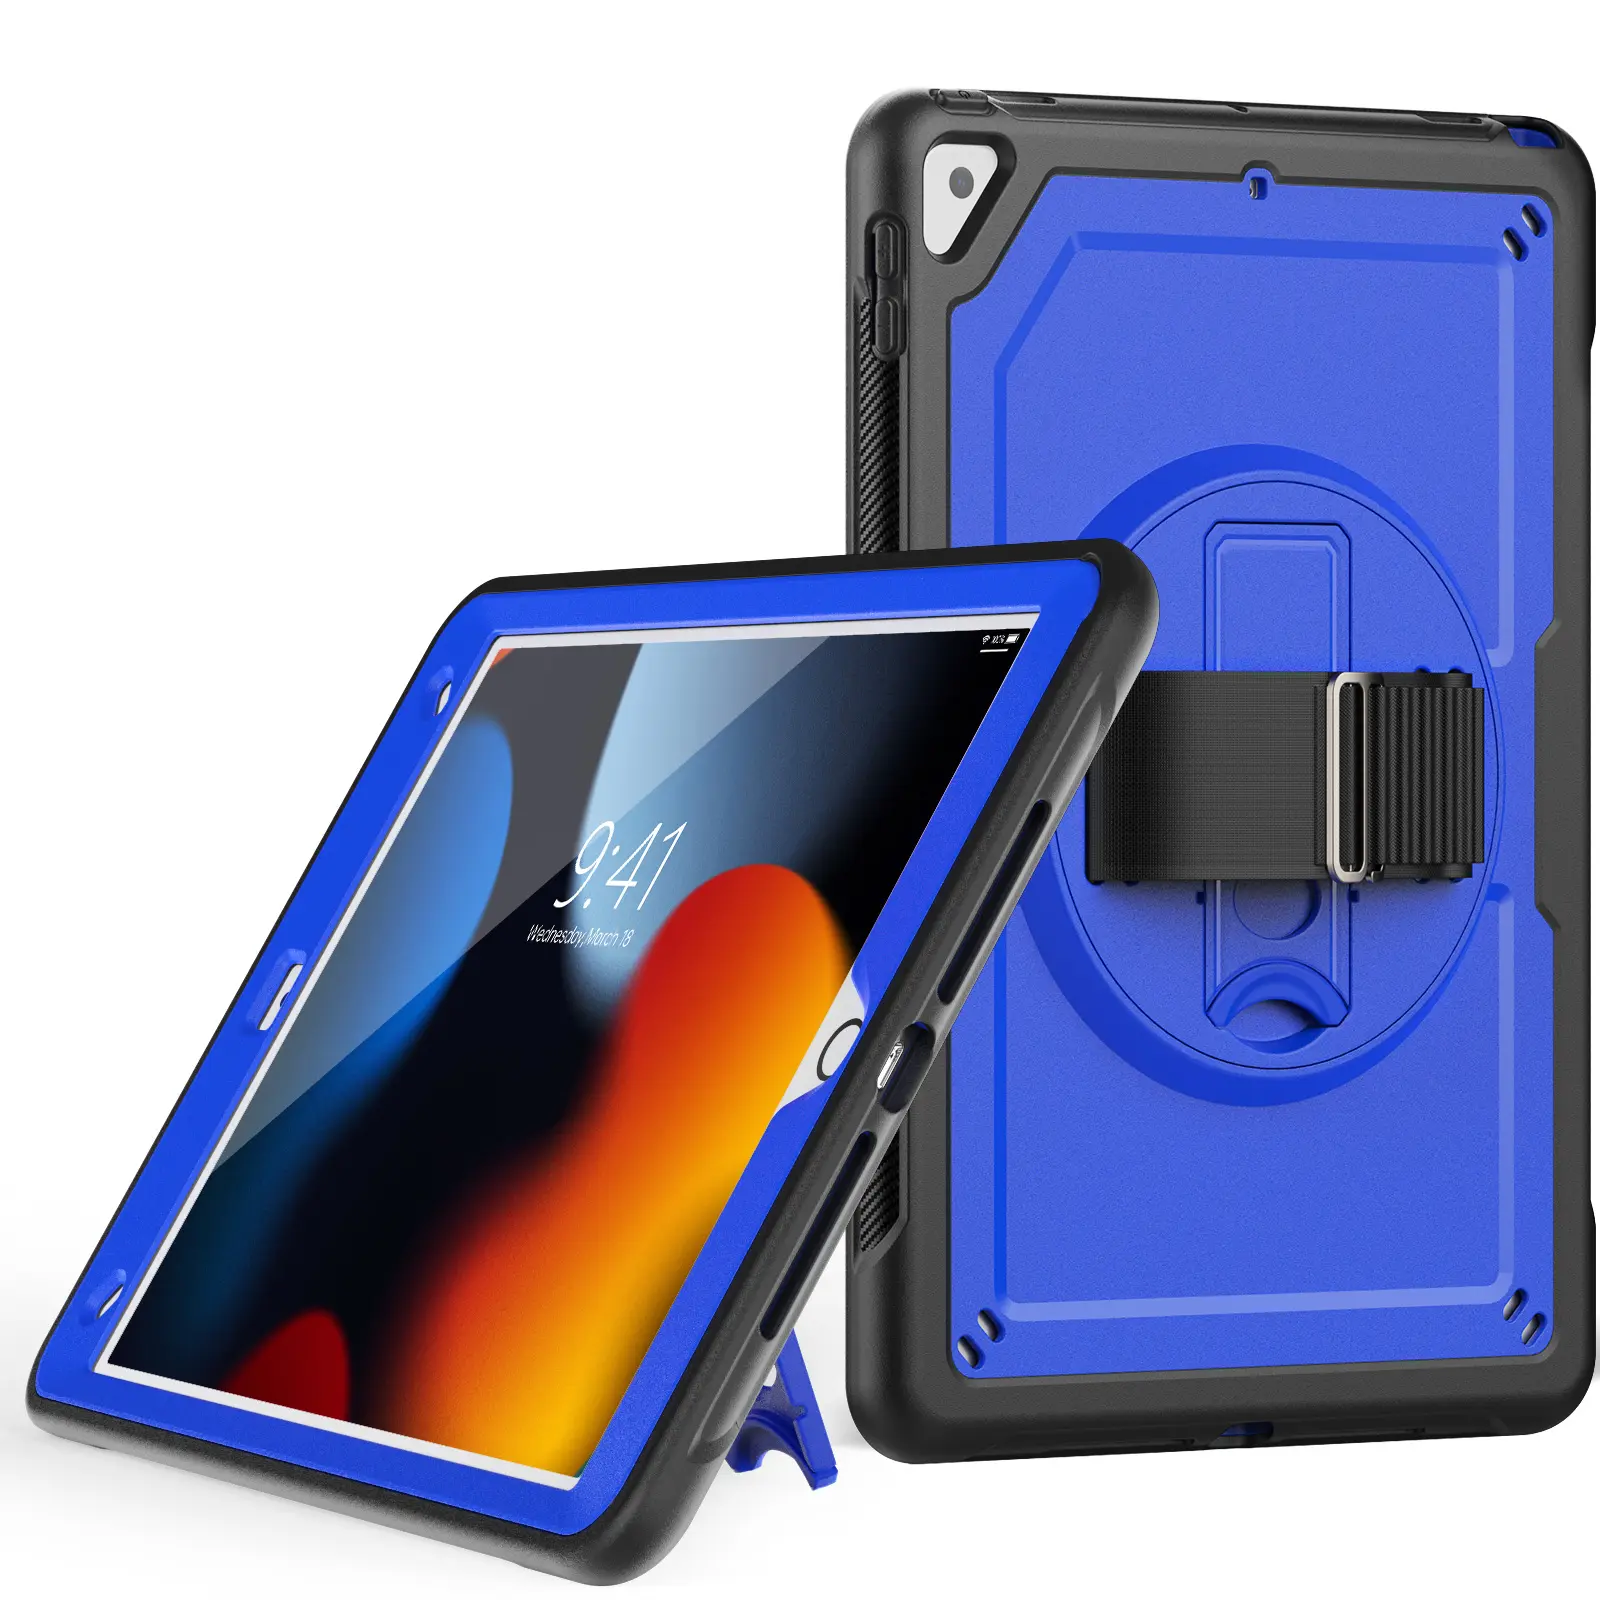 2024 new Tablet Case For iPad pro10.5 inch 2018 / For iPad Air 3 10.5 inch 2019 Shockproof Kickstand Hard PC Back Shell